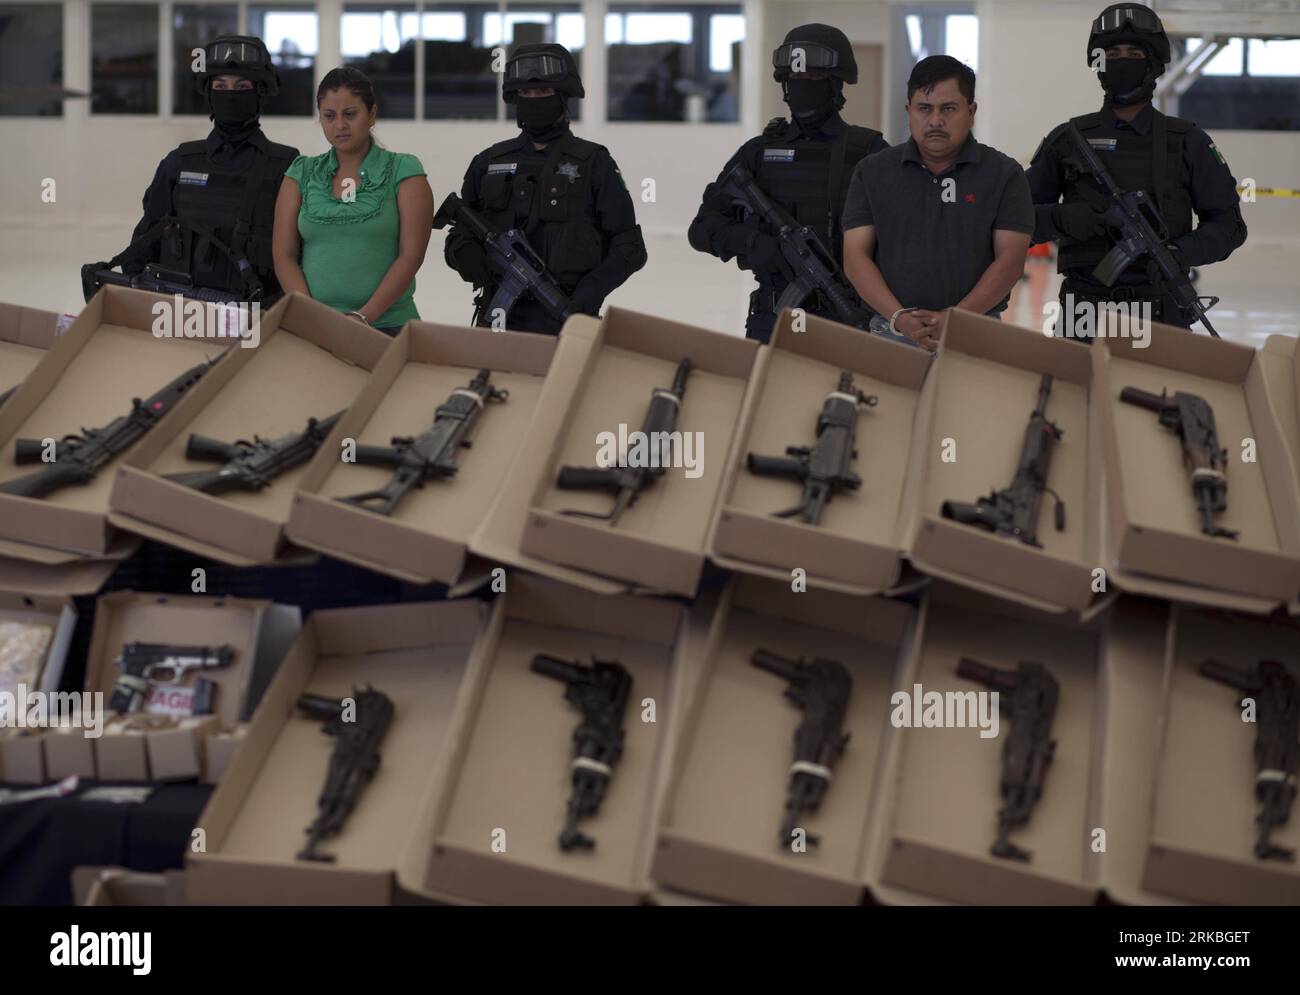 Bildnummer: 54558216  Datum: 22.10.2010  Copyright: imago/Xinhua (101022) -- MEXICO CITY, Oct. 22, 2010 (Xinhua) -- Federal police present Margarito Mendoza Lopez (2nd R) and Carmen Zuniga Arcia (2nd L), members of the drug cartel Los Zetas , to the press in Mexico City, on Oct. 22, 2010. Mexican police arrested Margarito Mendoza Lopez and Carmen Zuniga Arcia in Tabasco, south of Mexico, and seized 73 weapons, 2275 bullet cartridges and 2 kilograms of cocaine. (Xinhua/Jorge Dan Lopez) (zw) MEXICO-DRUG-CRIME-ARREST PUBLICATIONxNOTxINxCHN Gesellschaft Polizei Waffen Präsentation Mexiko kbdig xsp Stock Photo